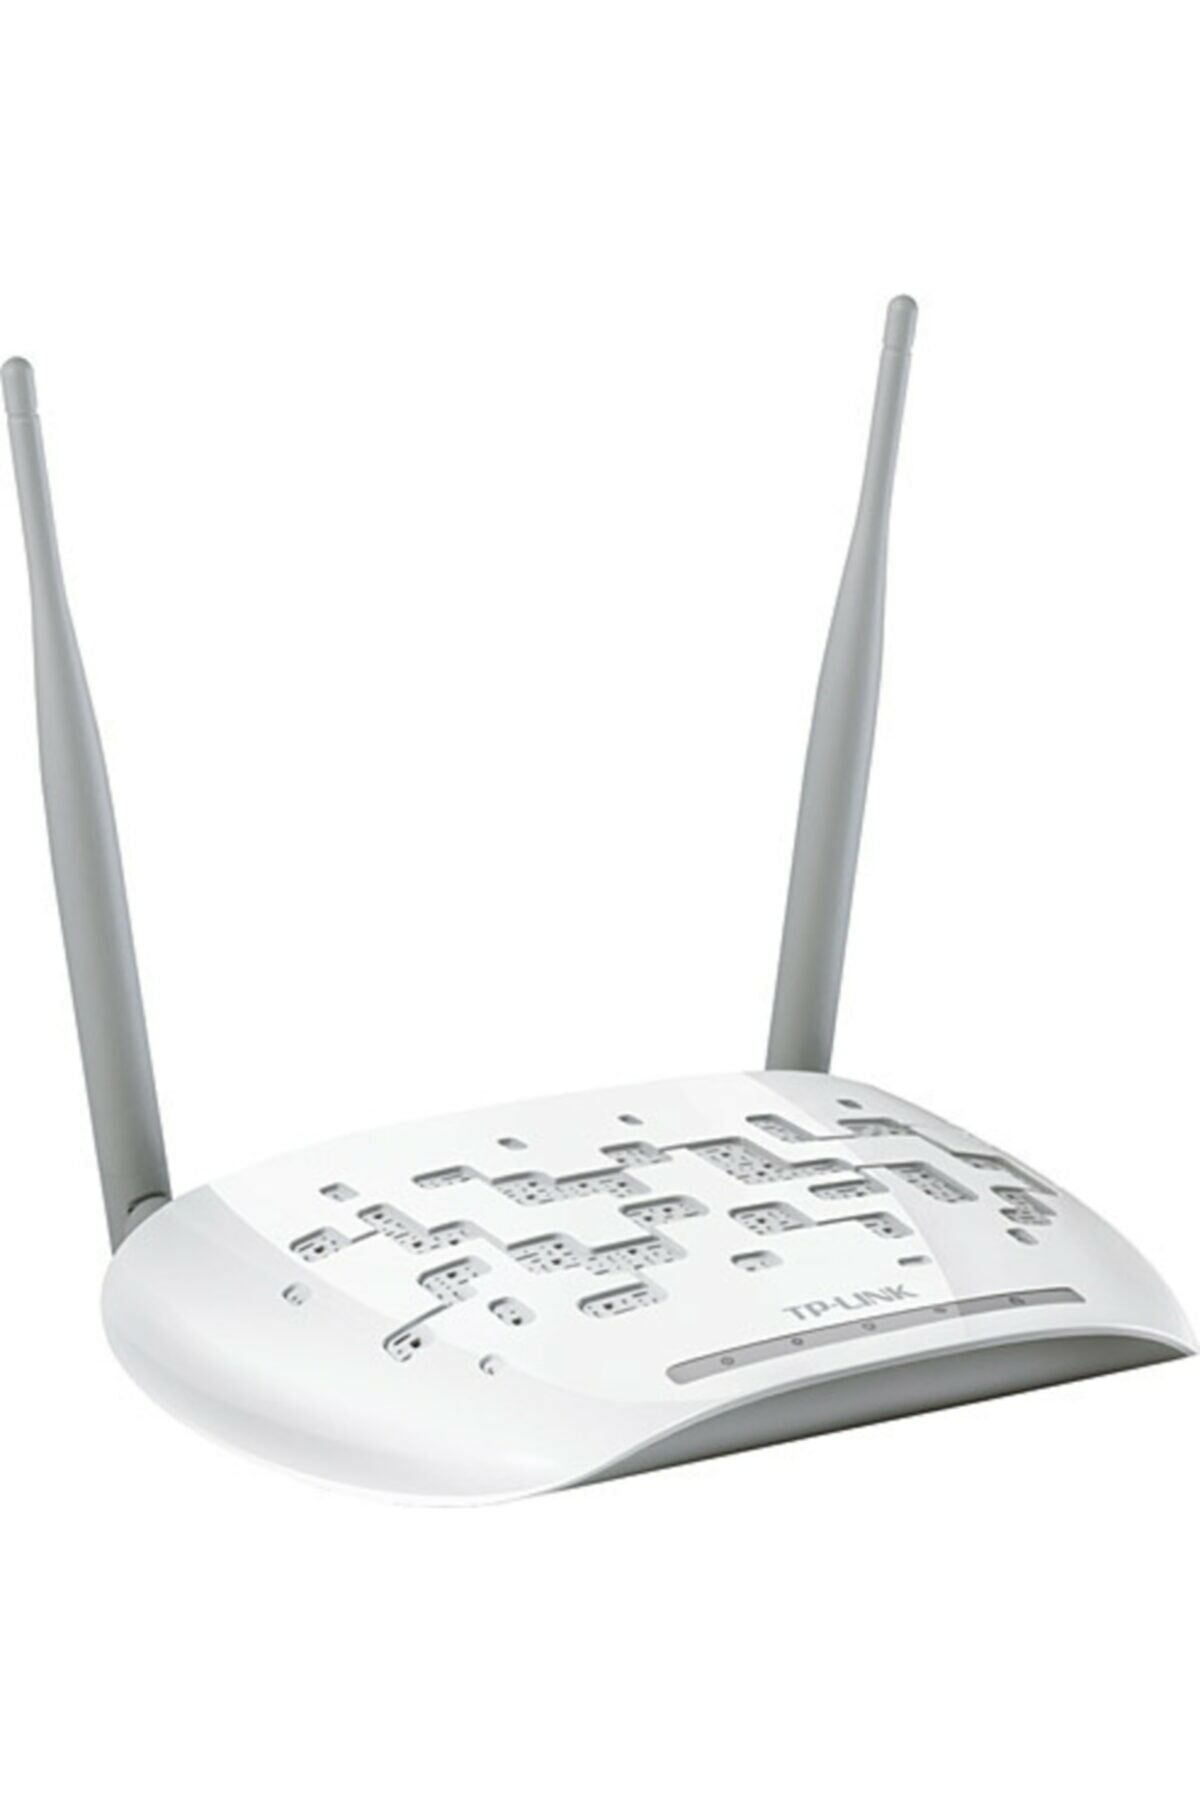 TP-LINK TL-WA801ND ACCESS POİNT